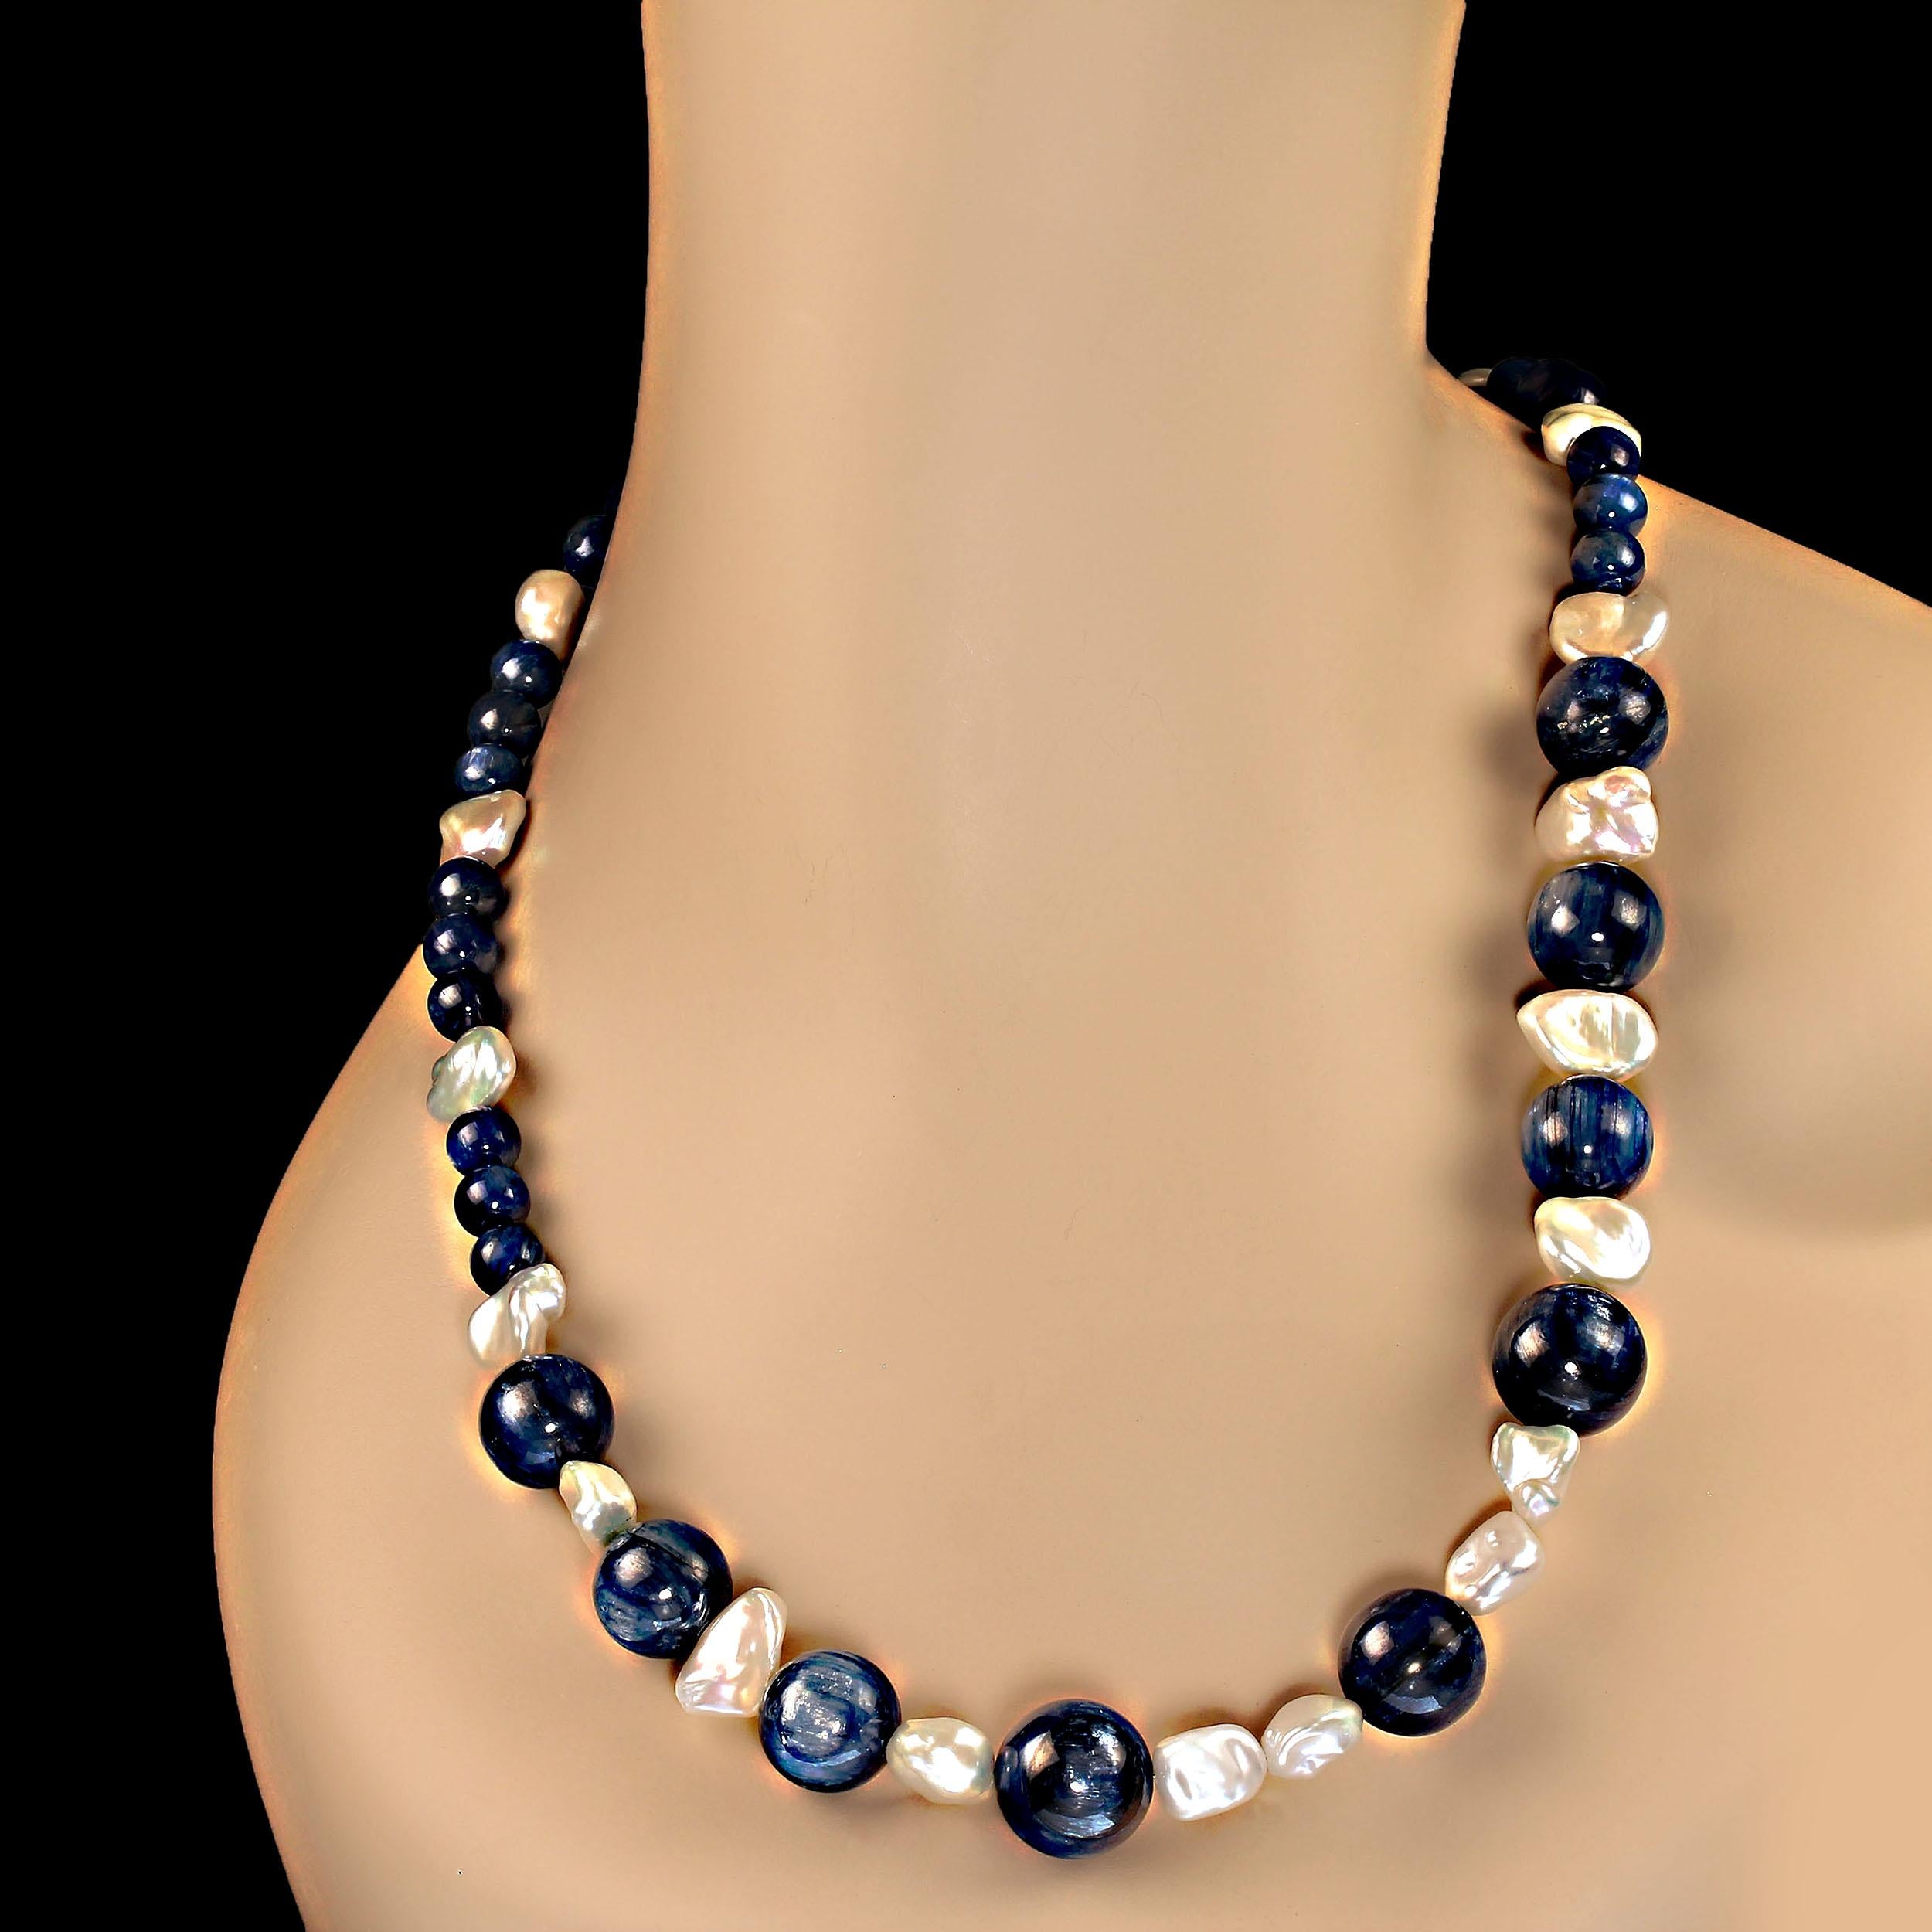 Bead AJD Glowing Kyanite and White Iridescent Pearl 23 Inch necklace Perfect Gift! For Sale